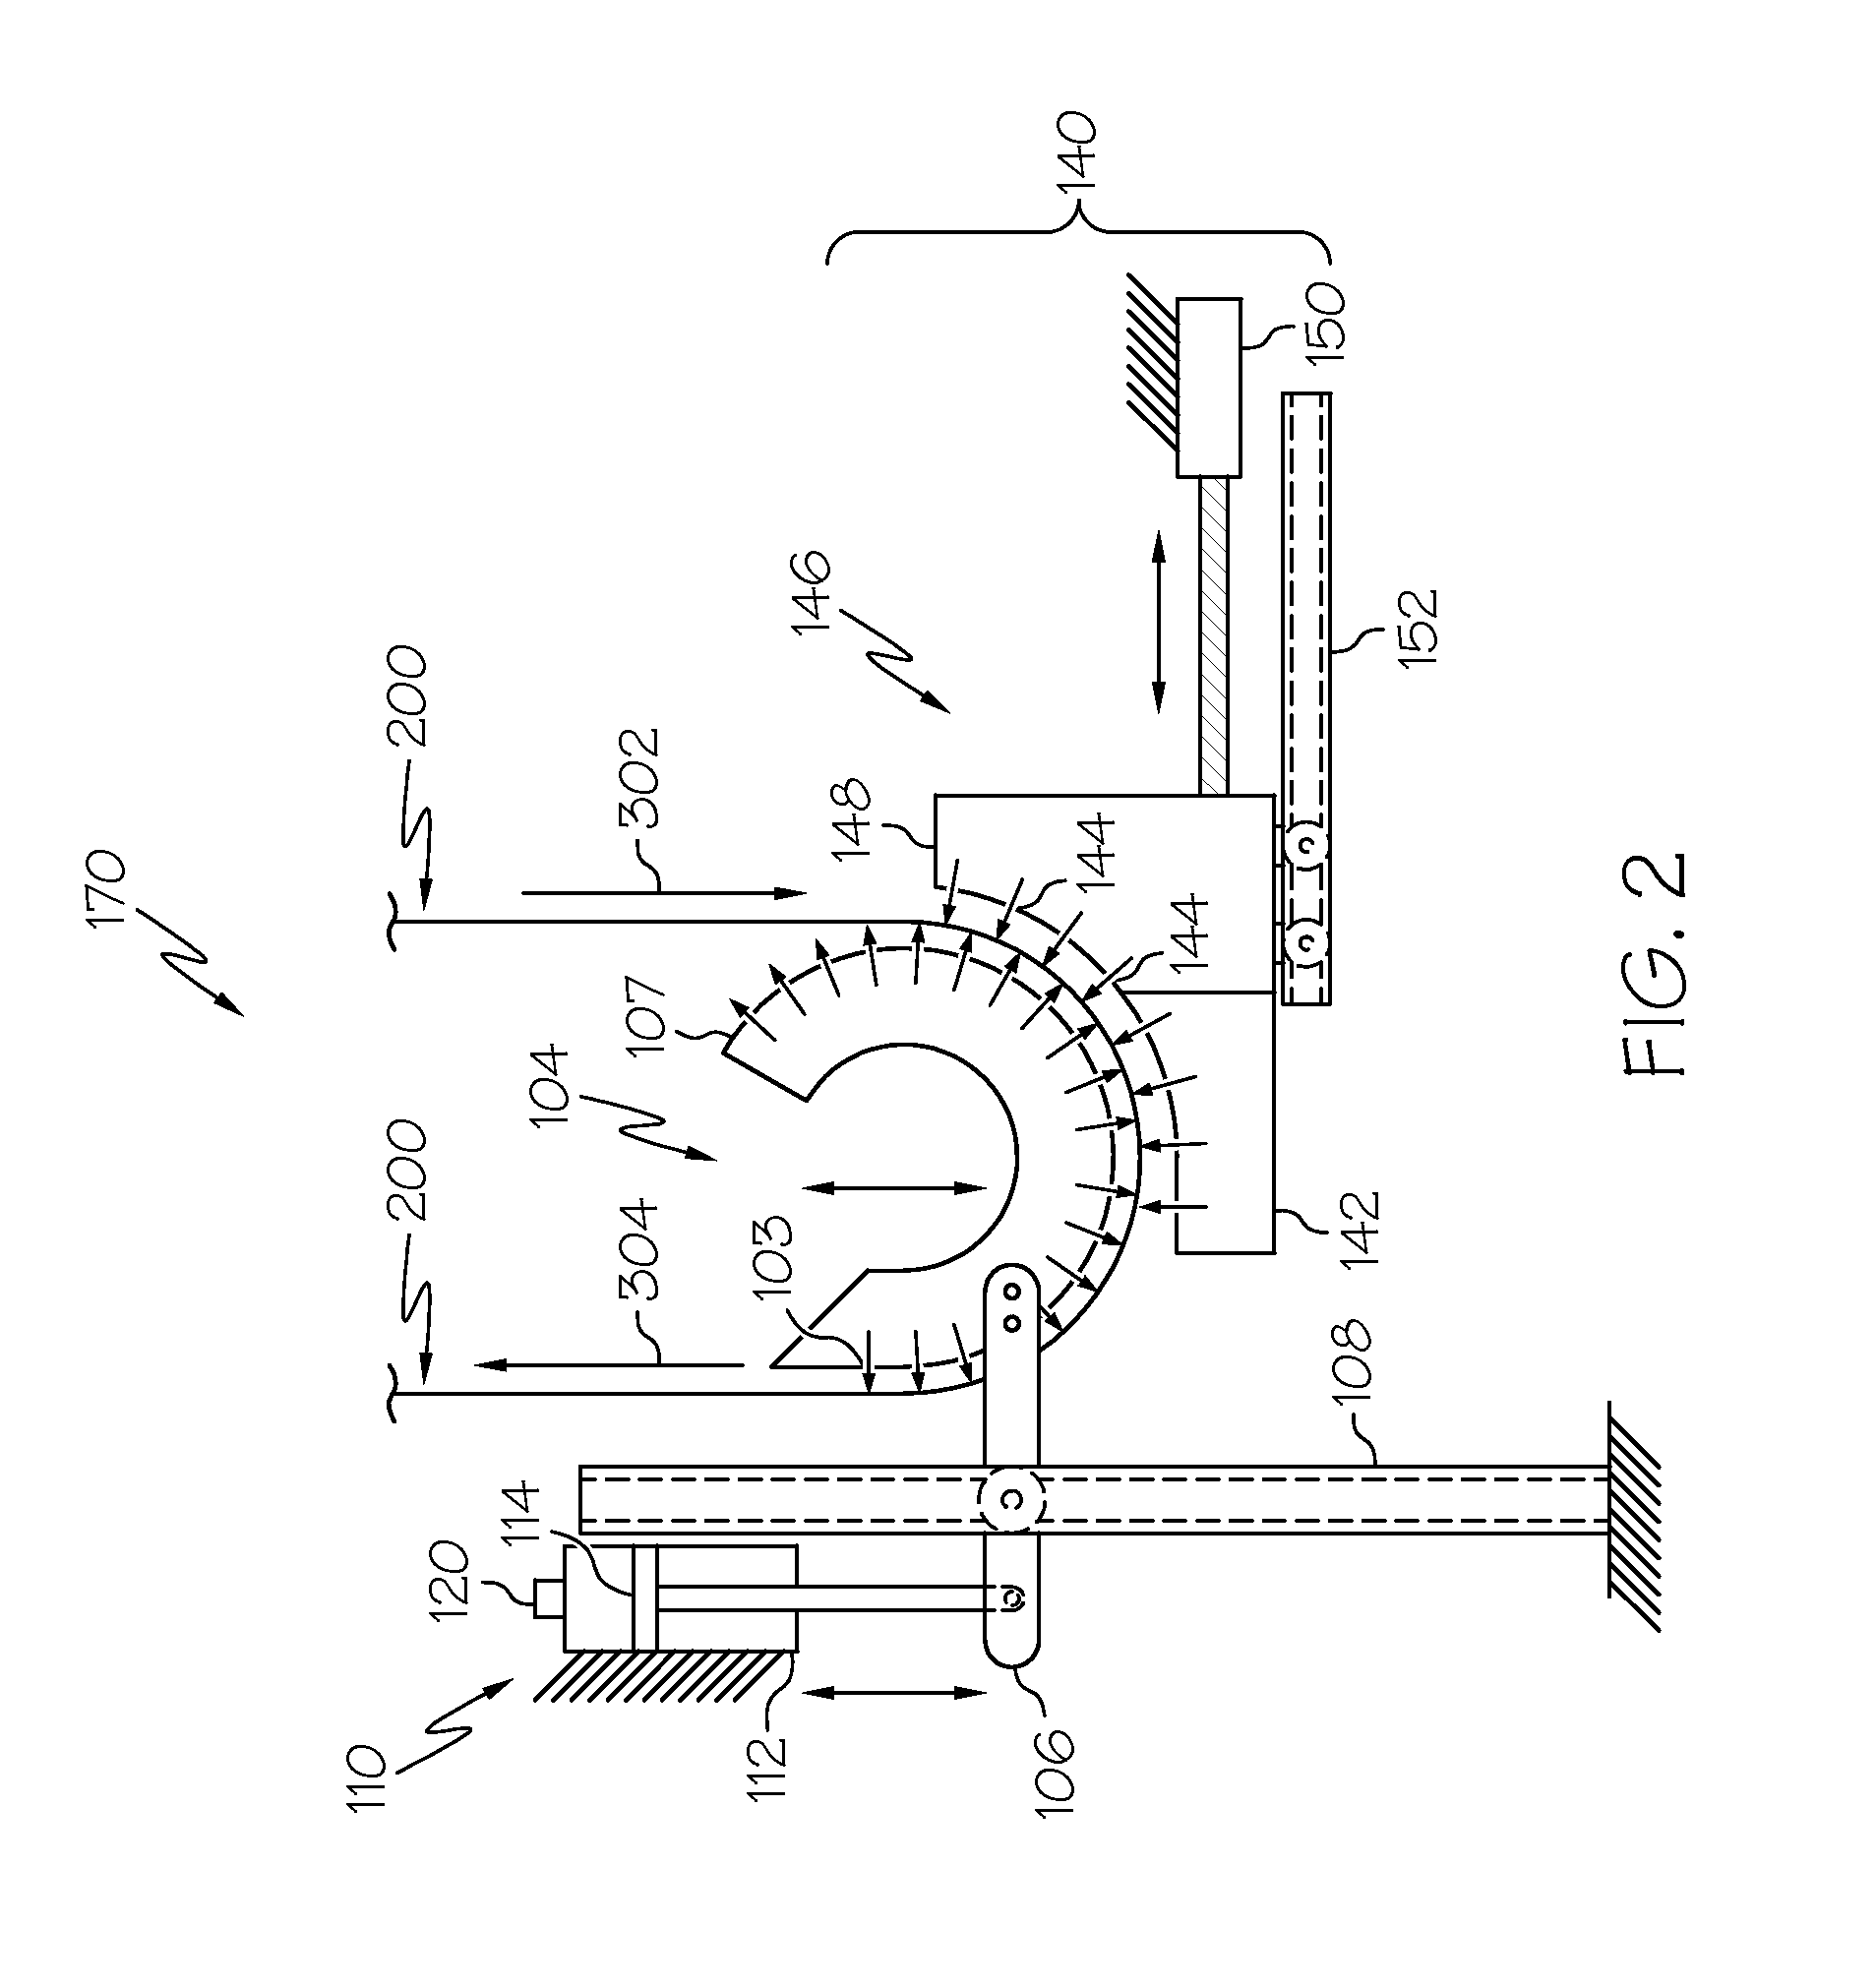 Non-contact dancer mechanisms, web isolation apparatuses and methods for using the same